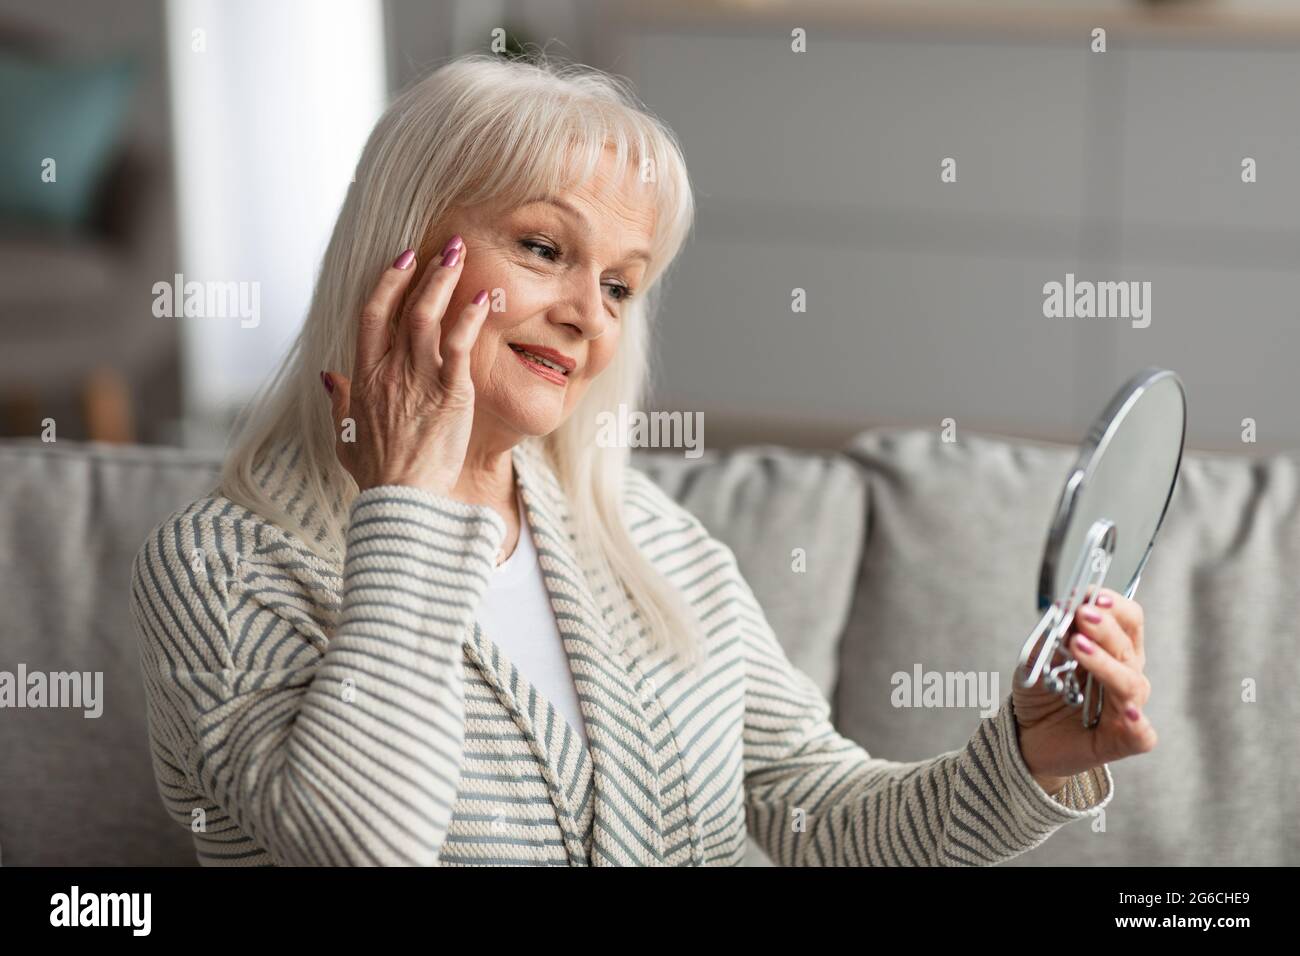 Smiling adult woman checking her face looking in mirror Stock Photo